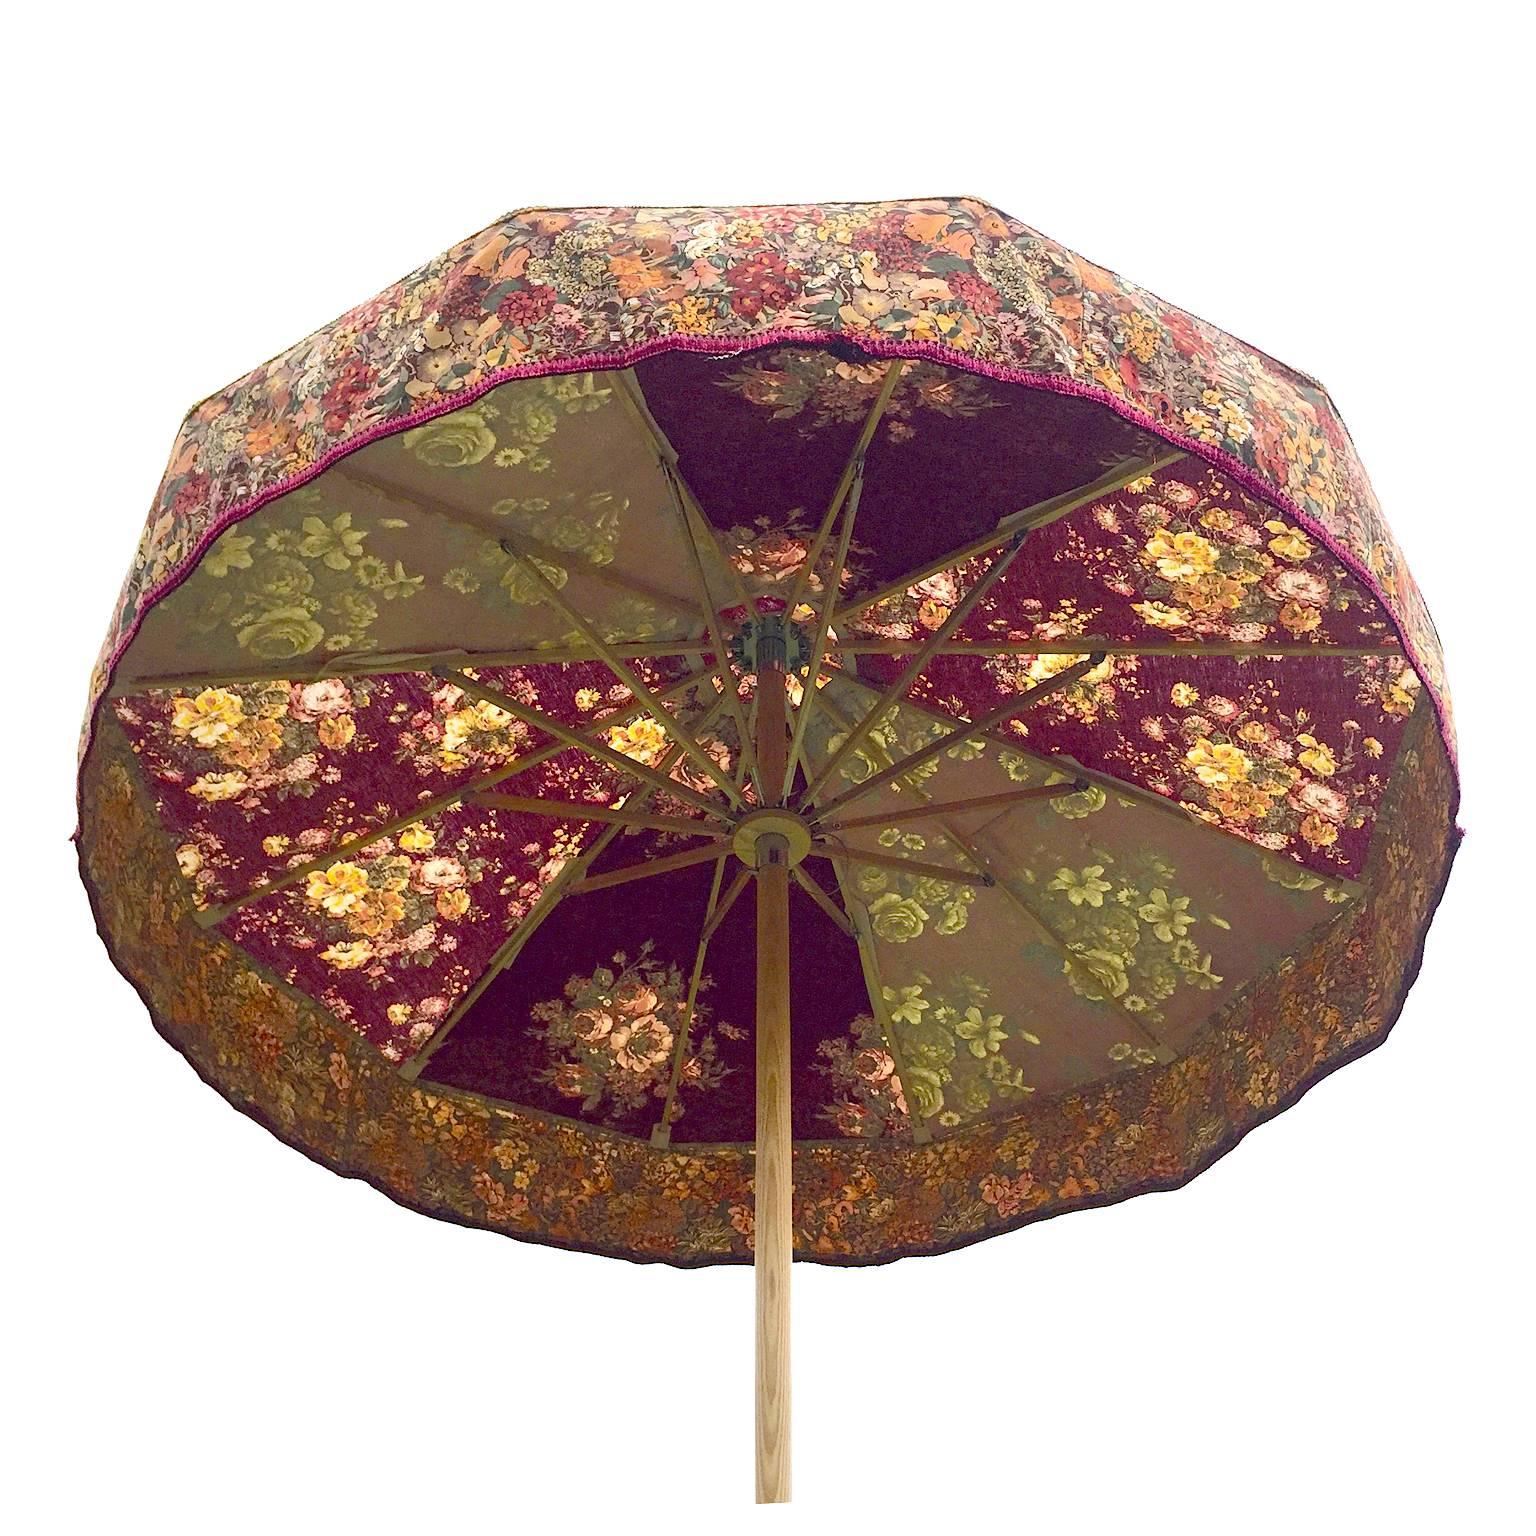 You are viewing 'Scarlet Pimpernel' one of Sunbeam Jackie's iconic sun umbrellas. 
This patio umbrella made using a unique combination of vintage fabrics from legendary British textile houses including Liberty of London and Sanderson. See the